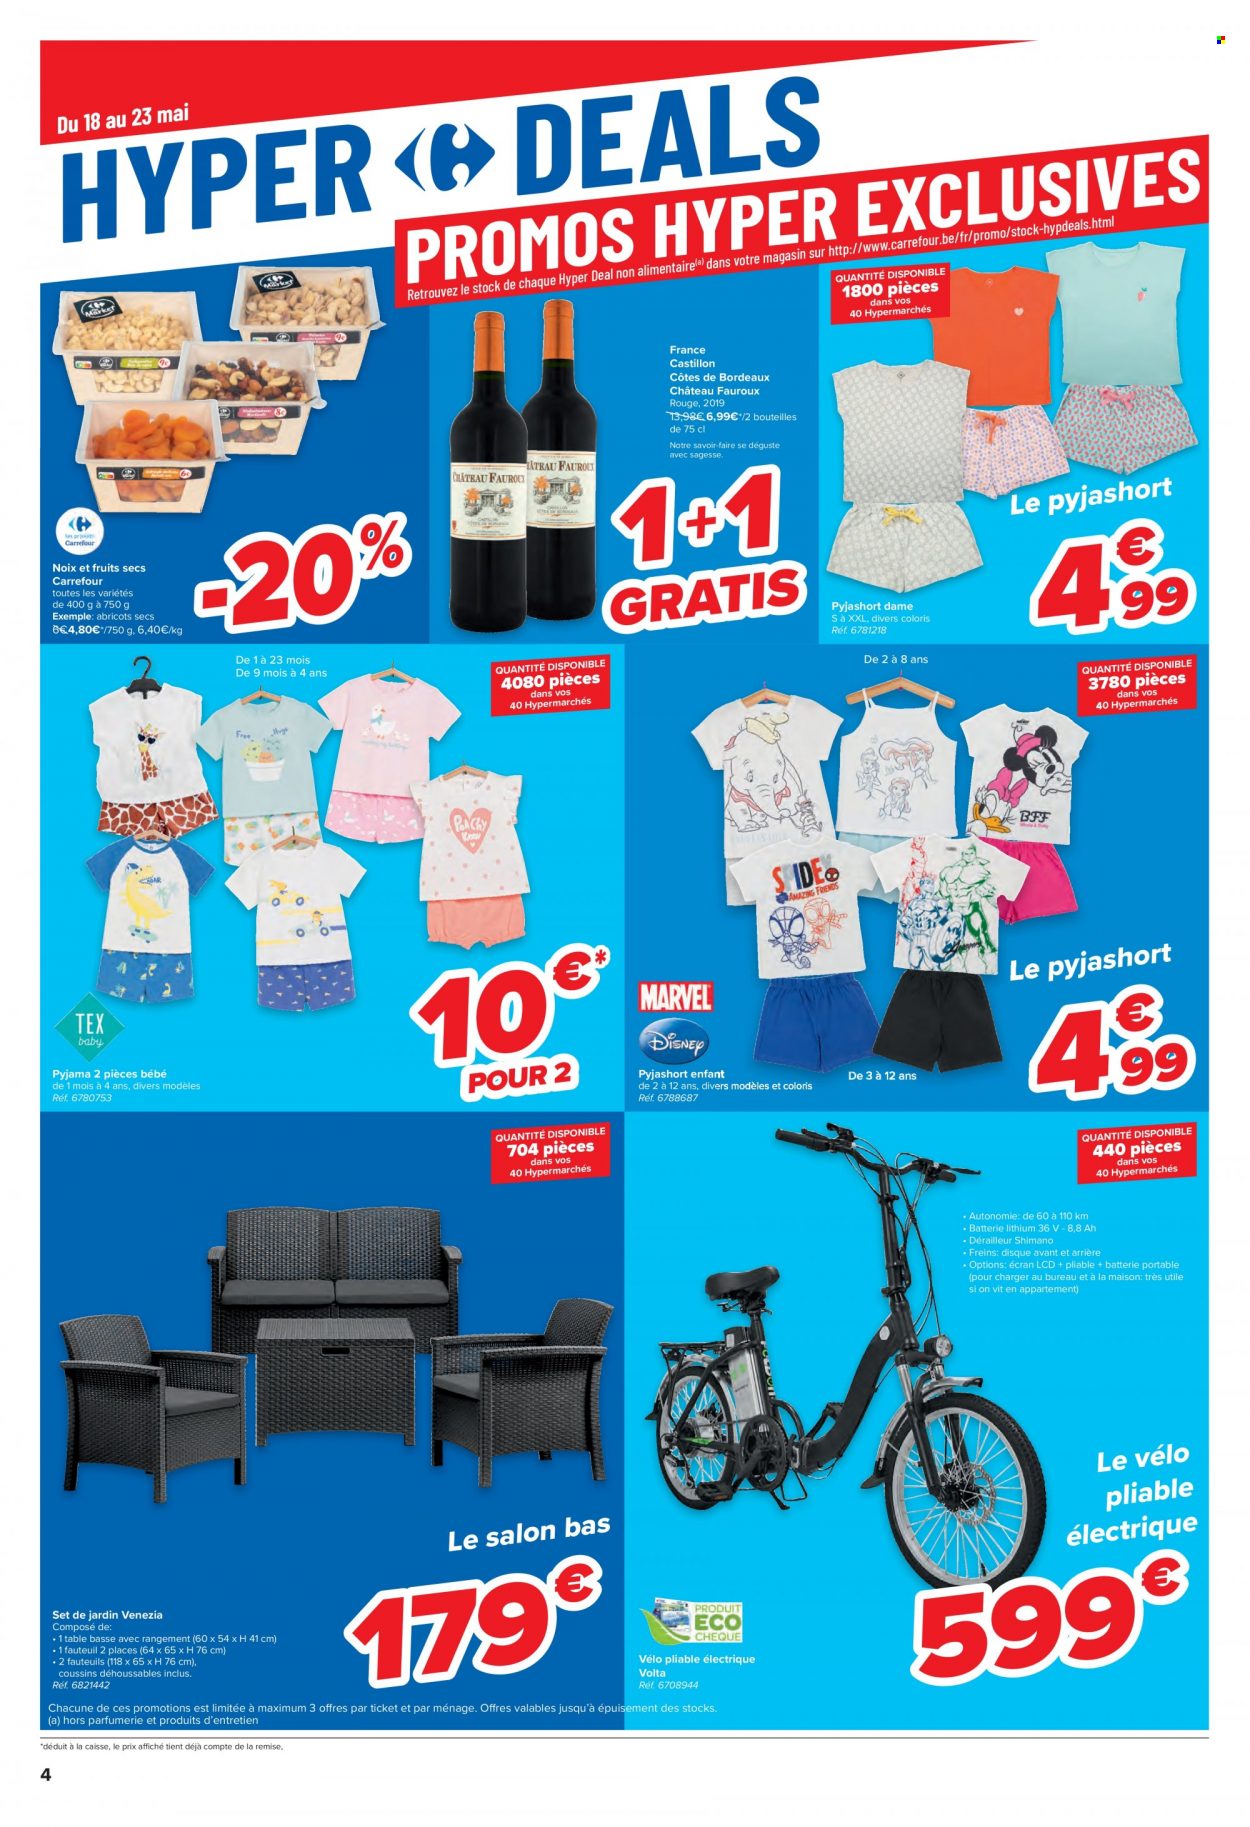 Catalogue Carrefour hypermarkt - 18.5.2022 - 23.5.2022. Page 4.